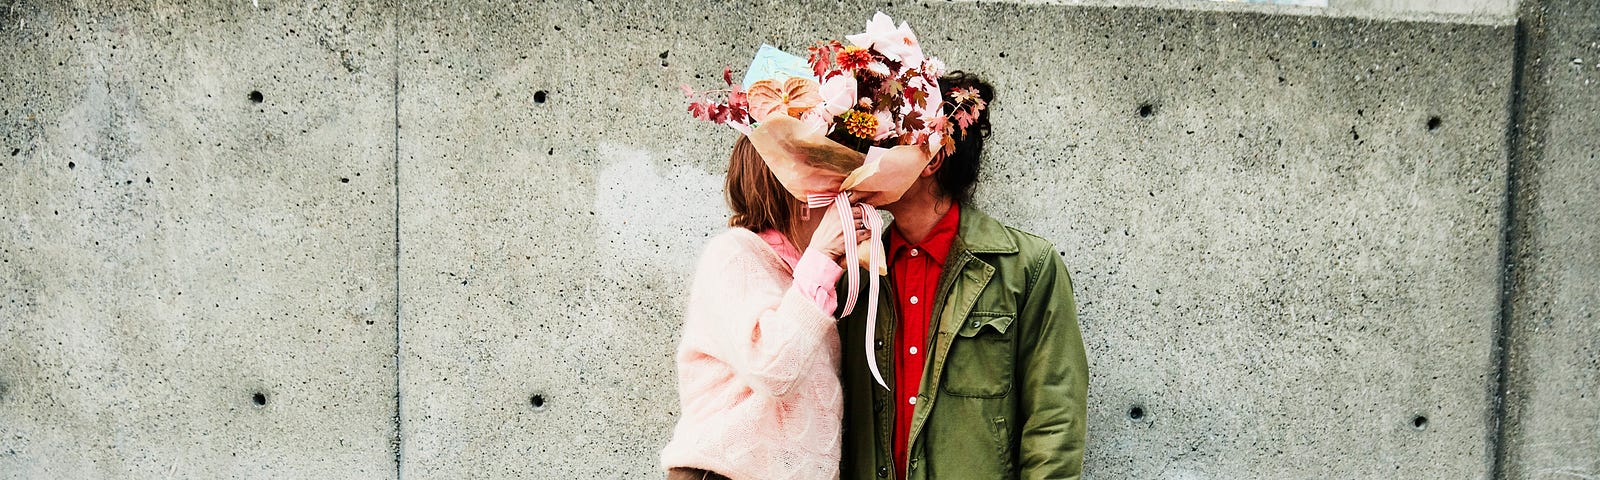 Couple kissing behind bouquet of flowers.